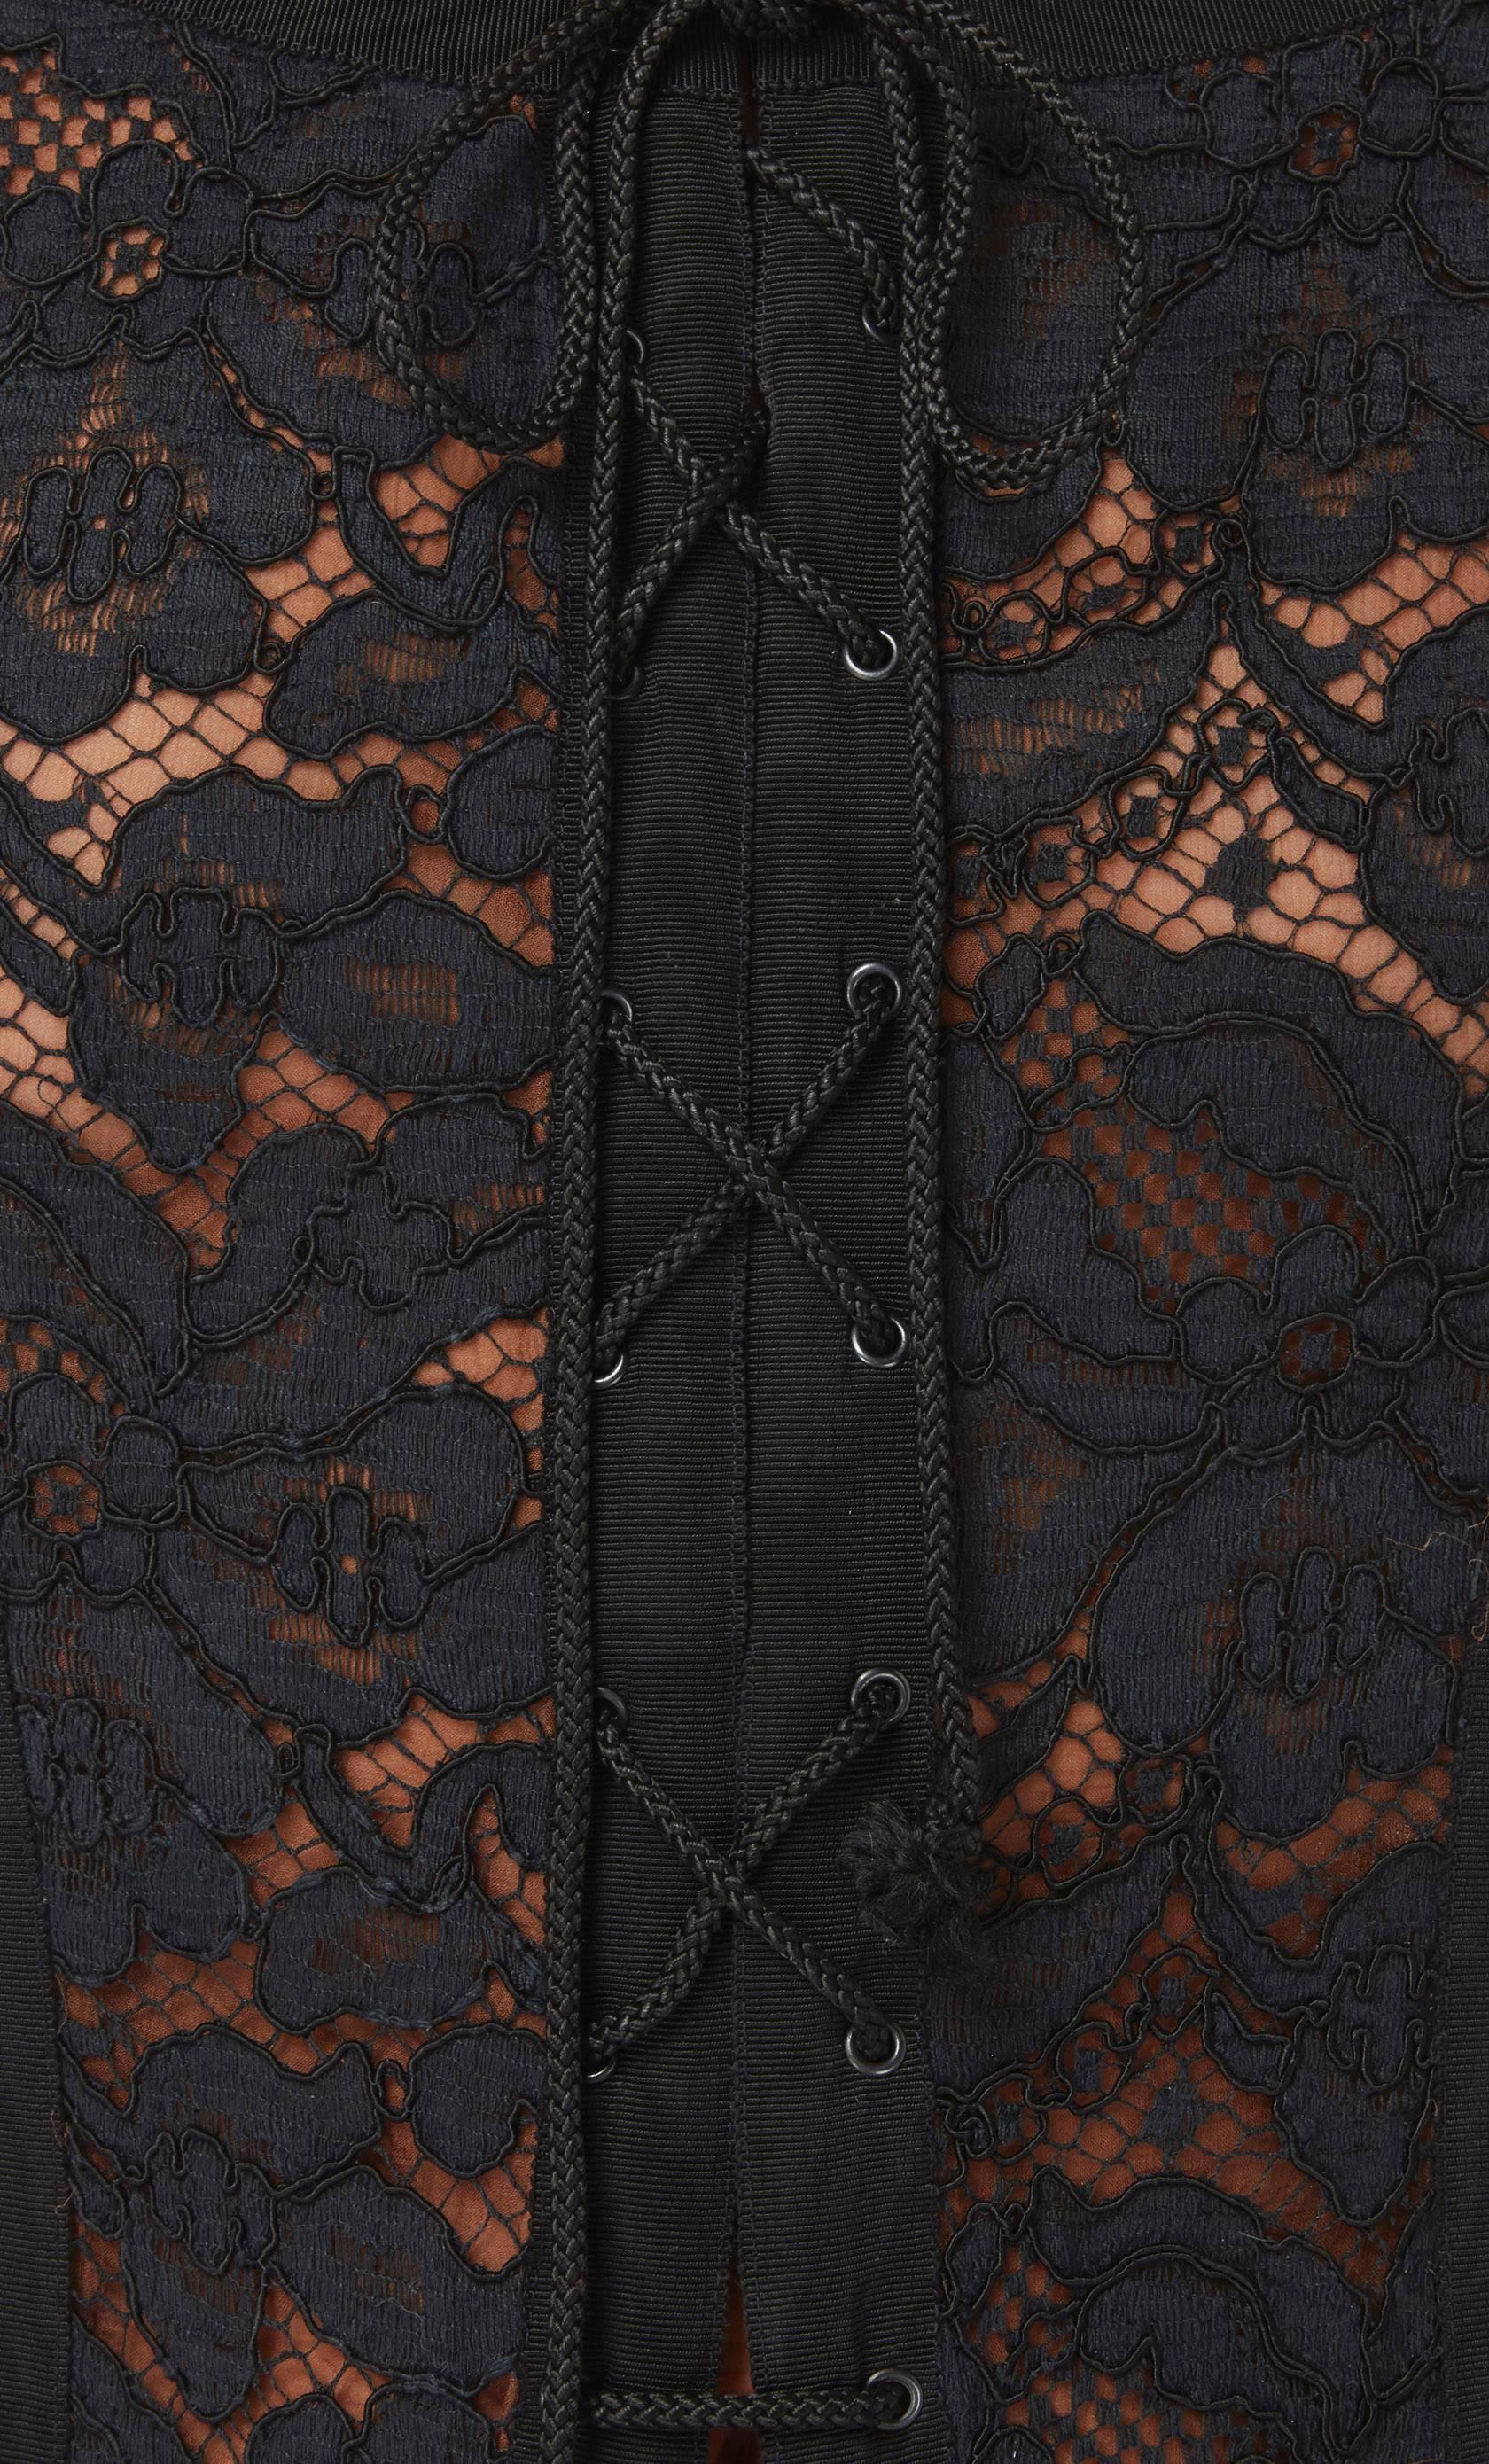 Yves Saint Laurent black bodice, Autumn/Winter 1976 In Excellent Condition For Sale In London, GB